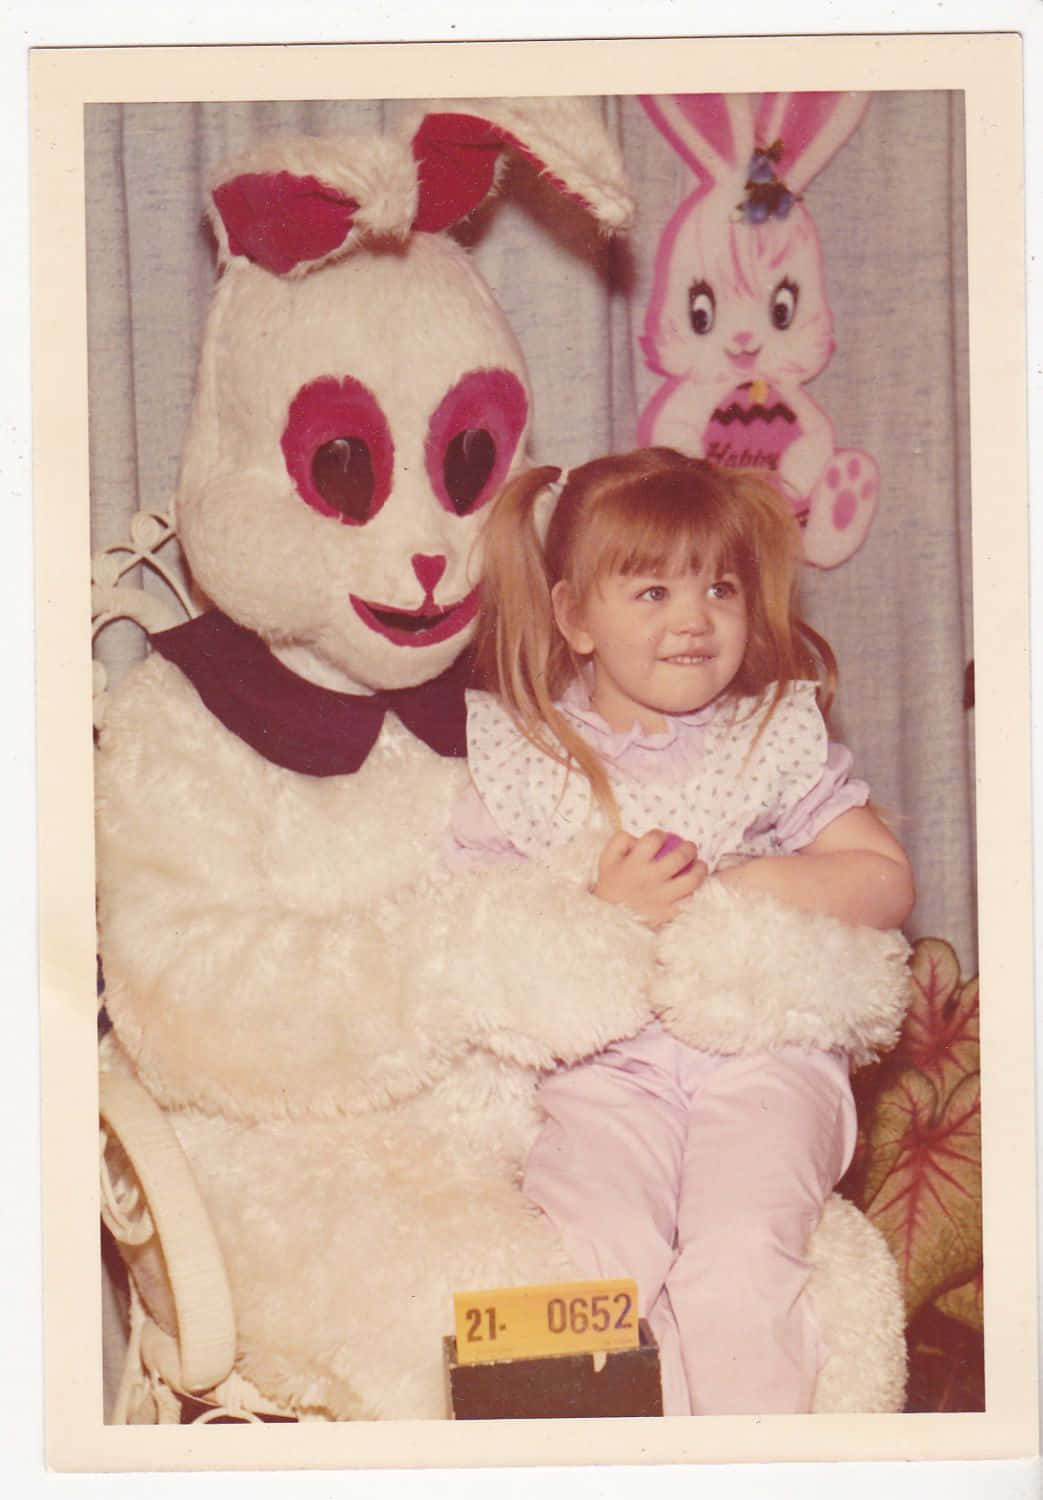 The Creepy Easter Bunny is sure to bring a fright!